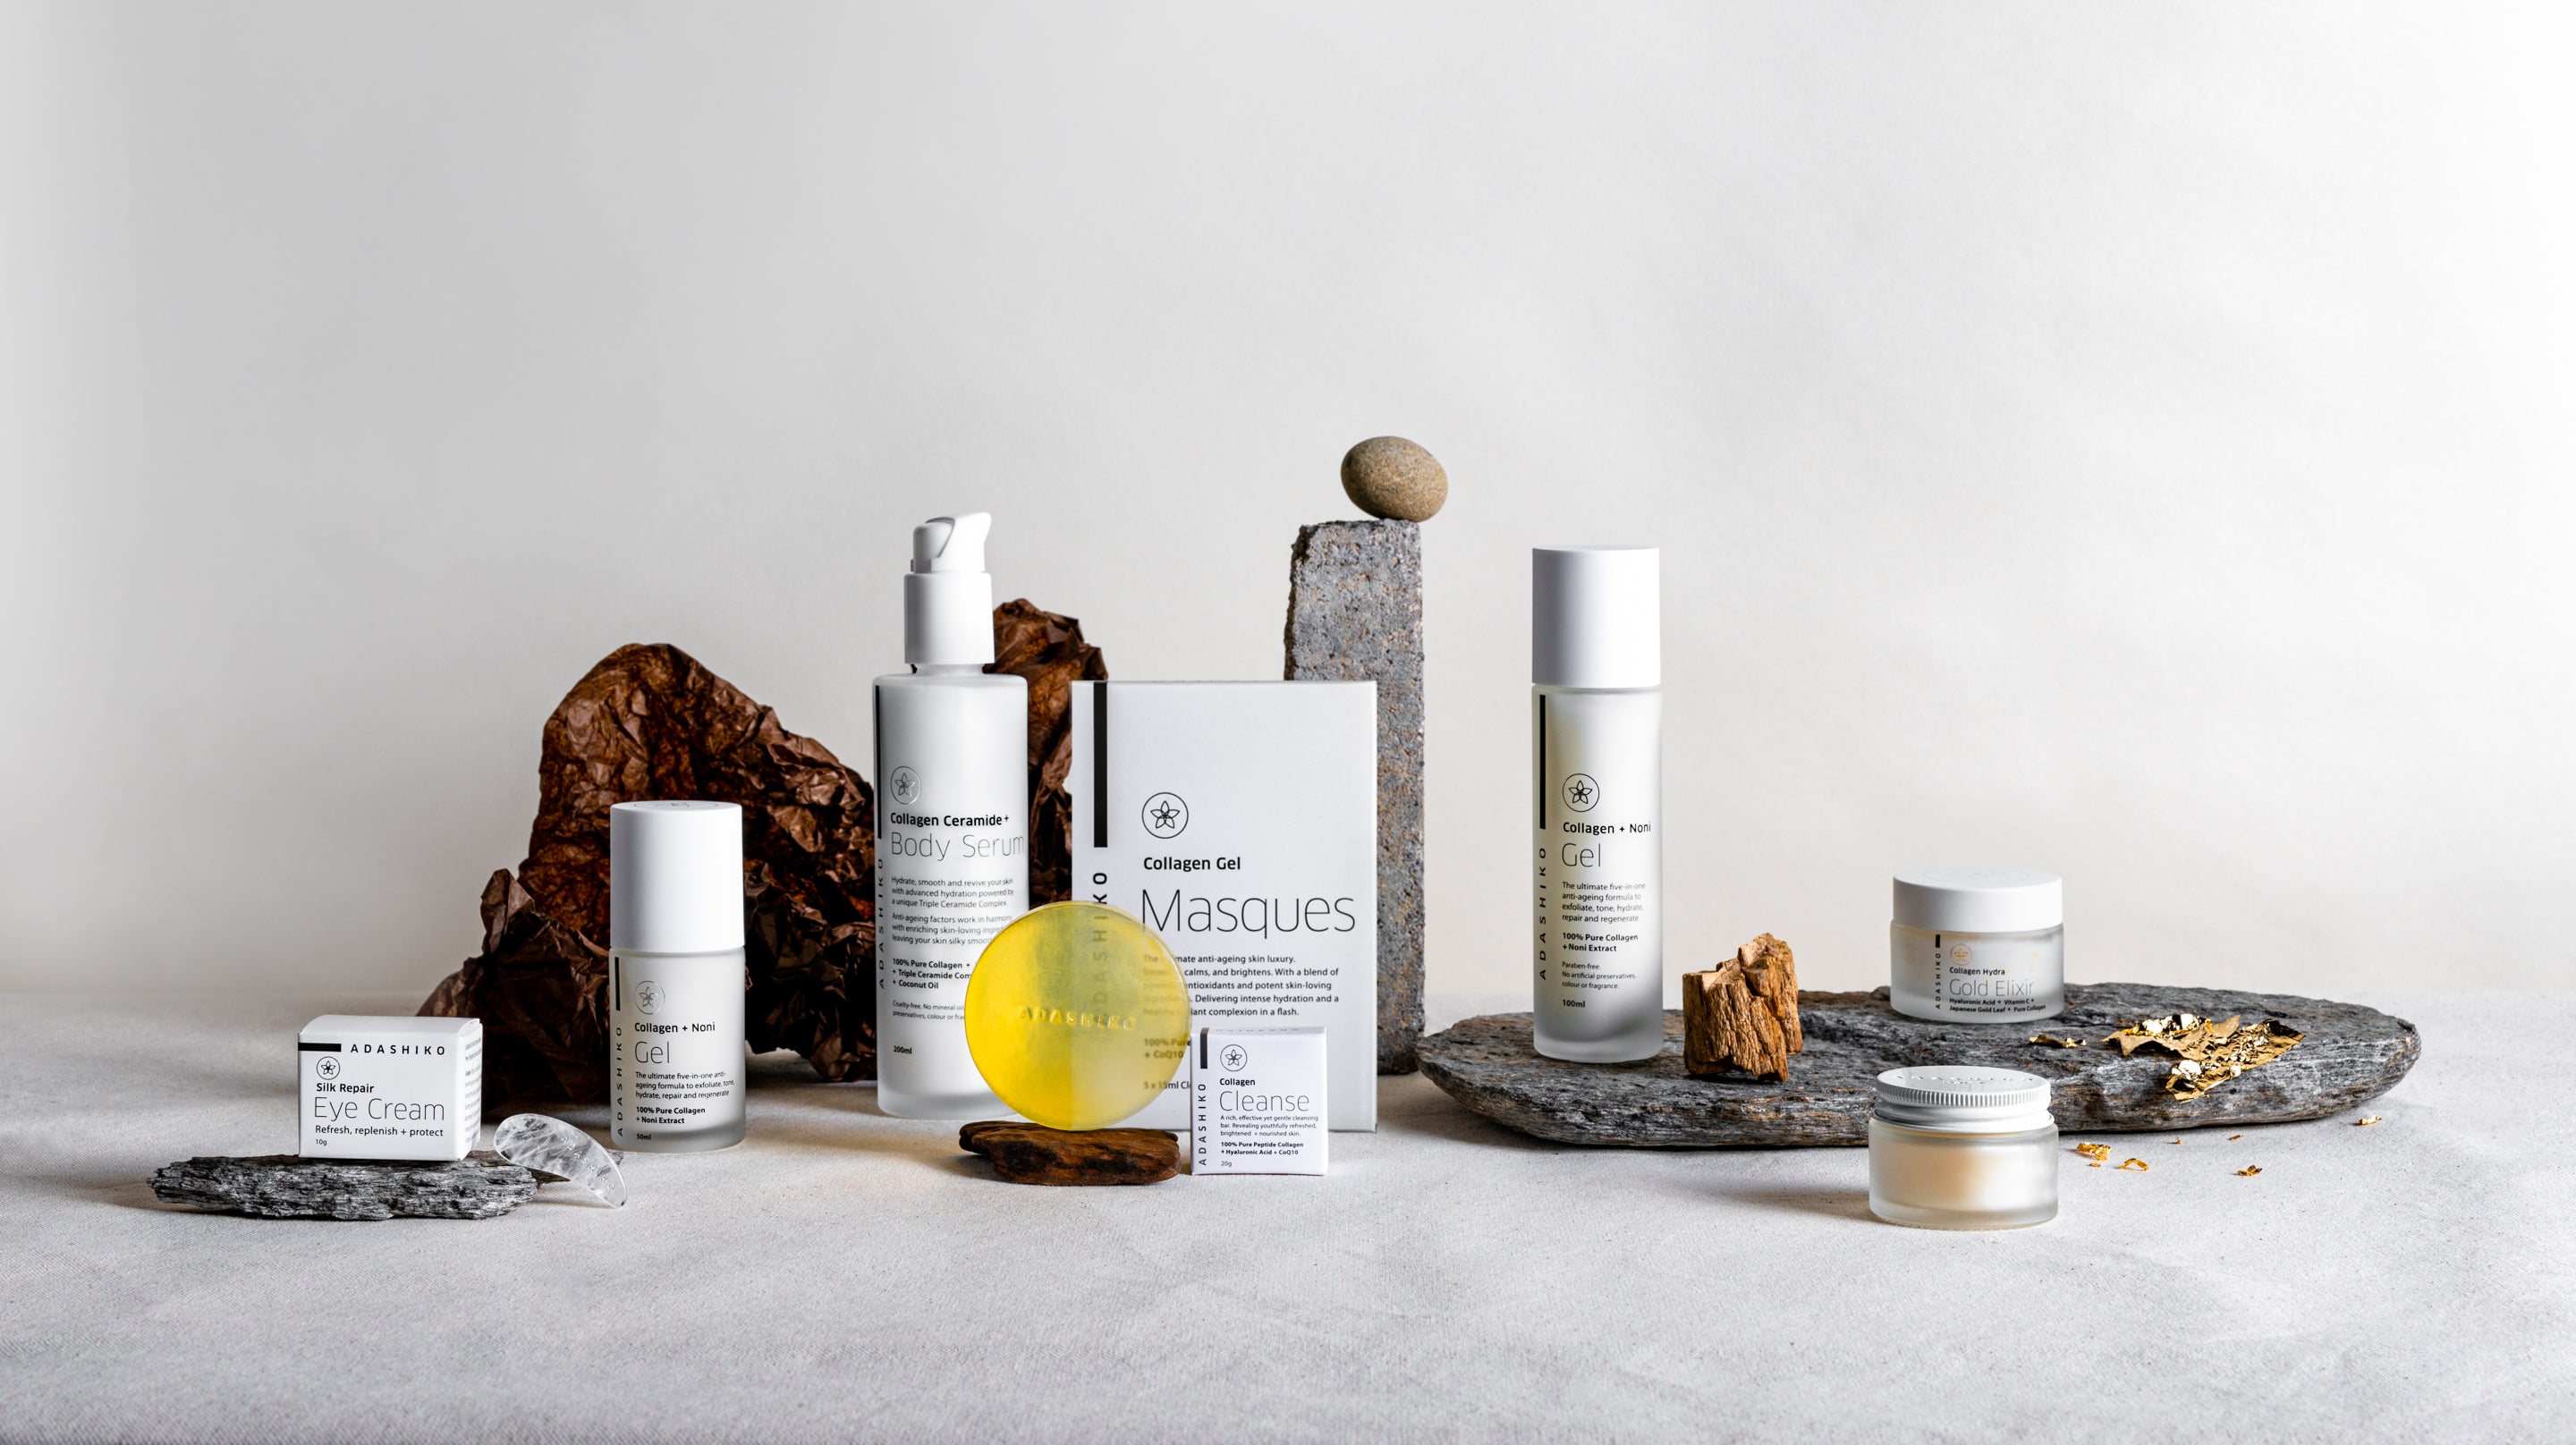 Adashiko Collagen Skincare Collection - products displayed against a grey background | Adashiko Collagen | 100% Natural Skincare